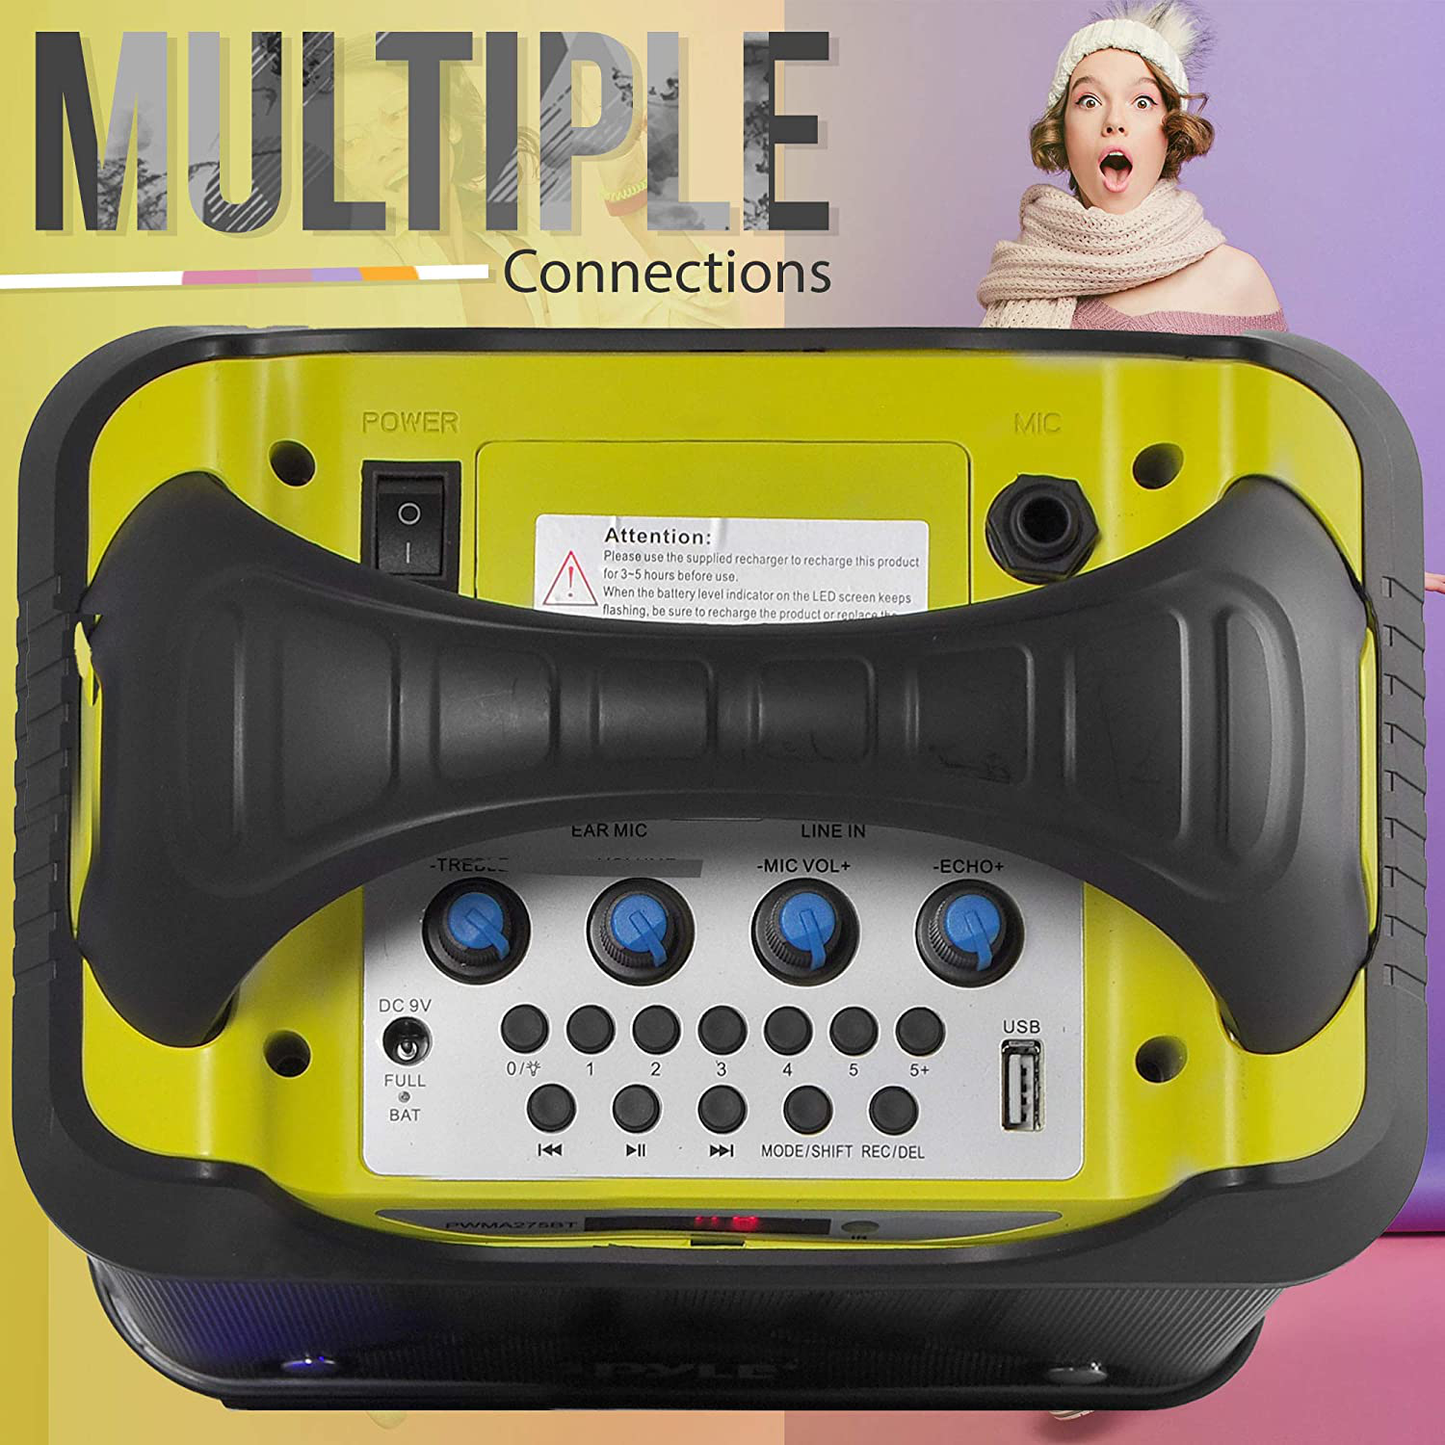 Portable Bluetooth Karaoke Speaker System - Audio Recording Function, 32 GB USB/SD Card Support, Built-In Rechargeable Battery, Flashing DJ Light W/ Music Streaming & Handheld Mic - Pyle PWMA275BT